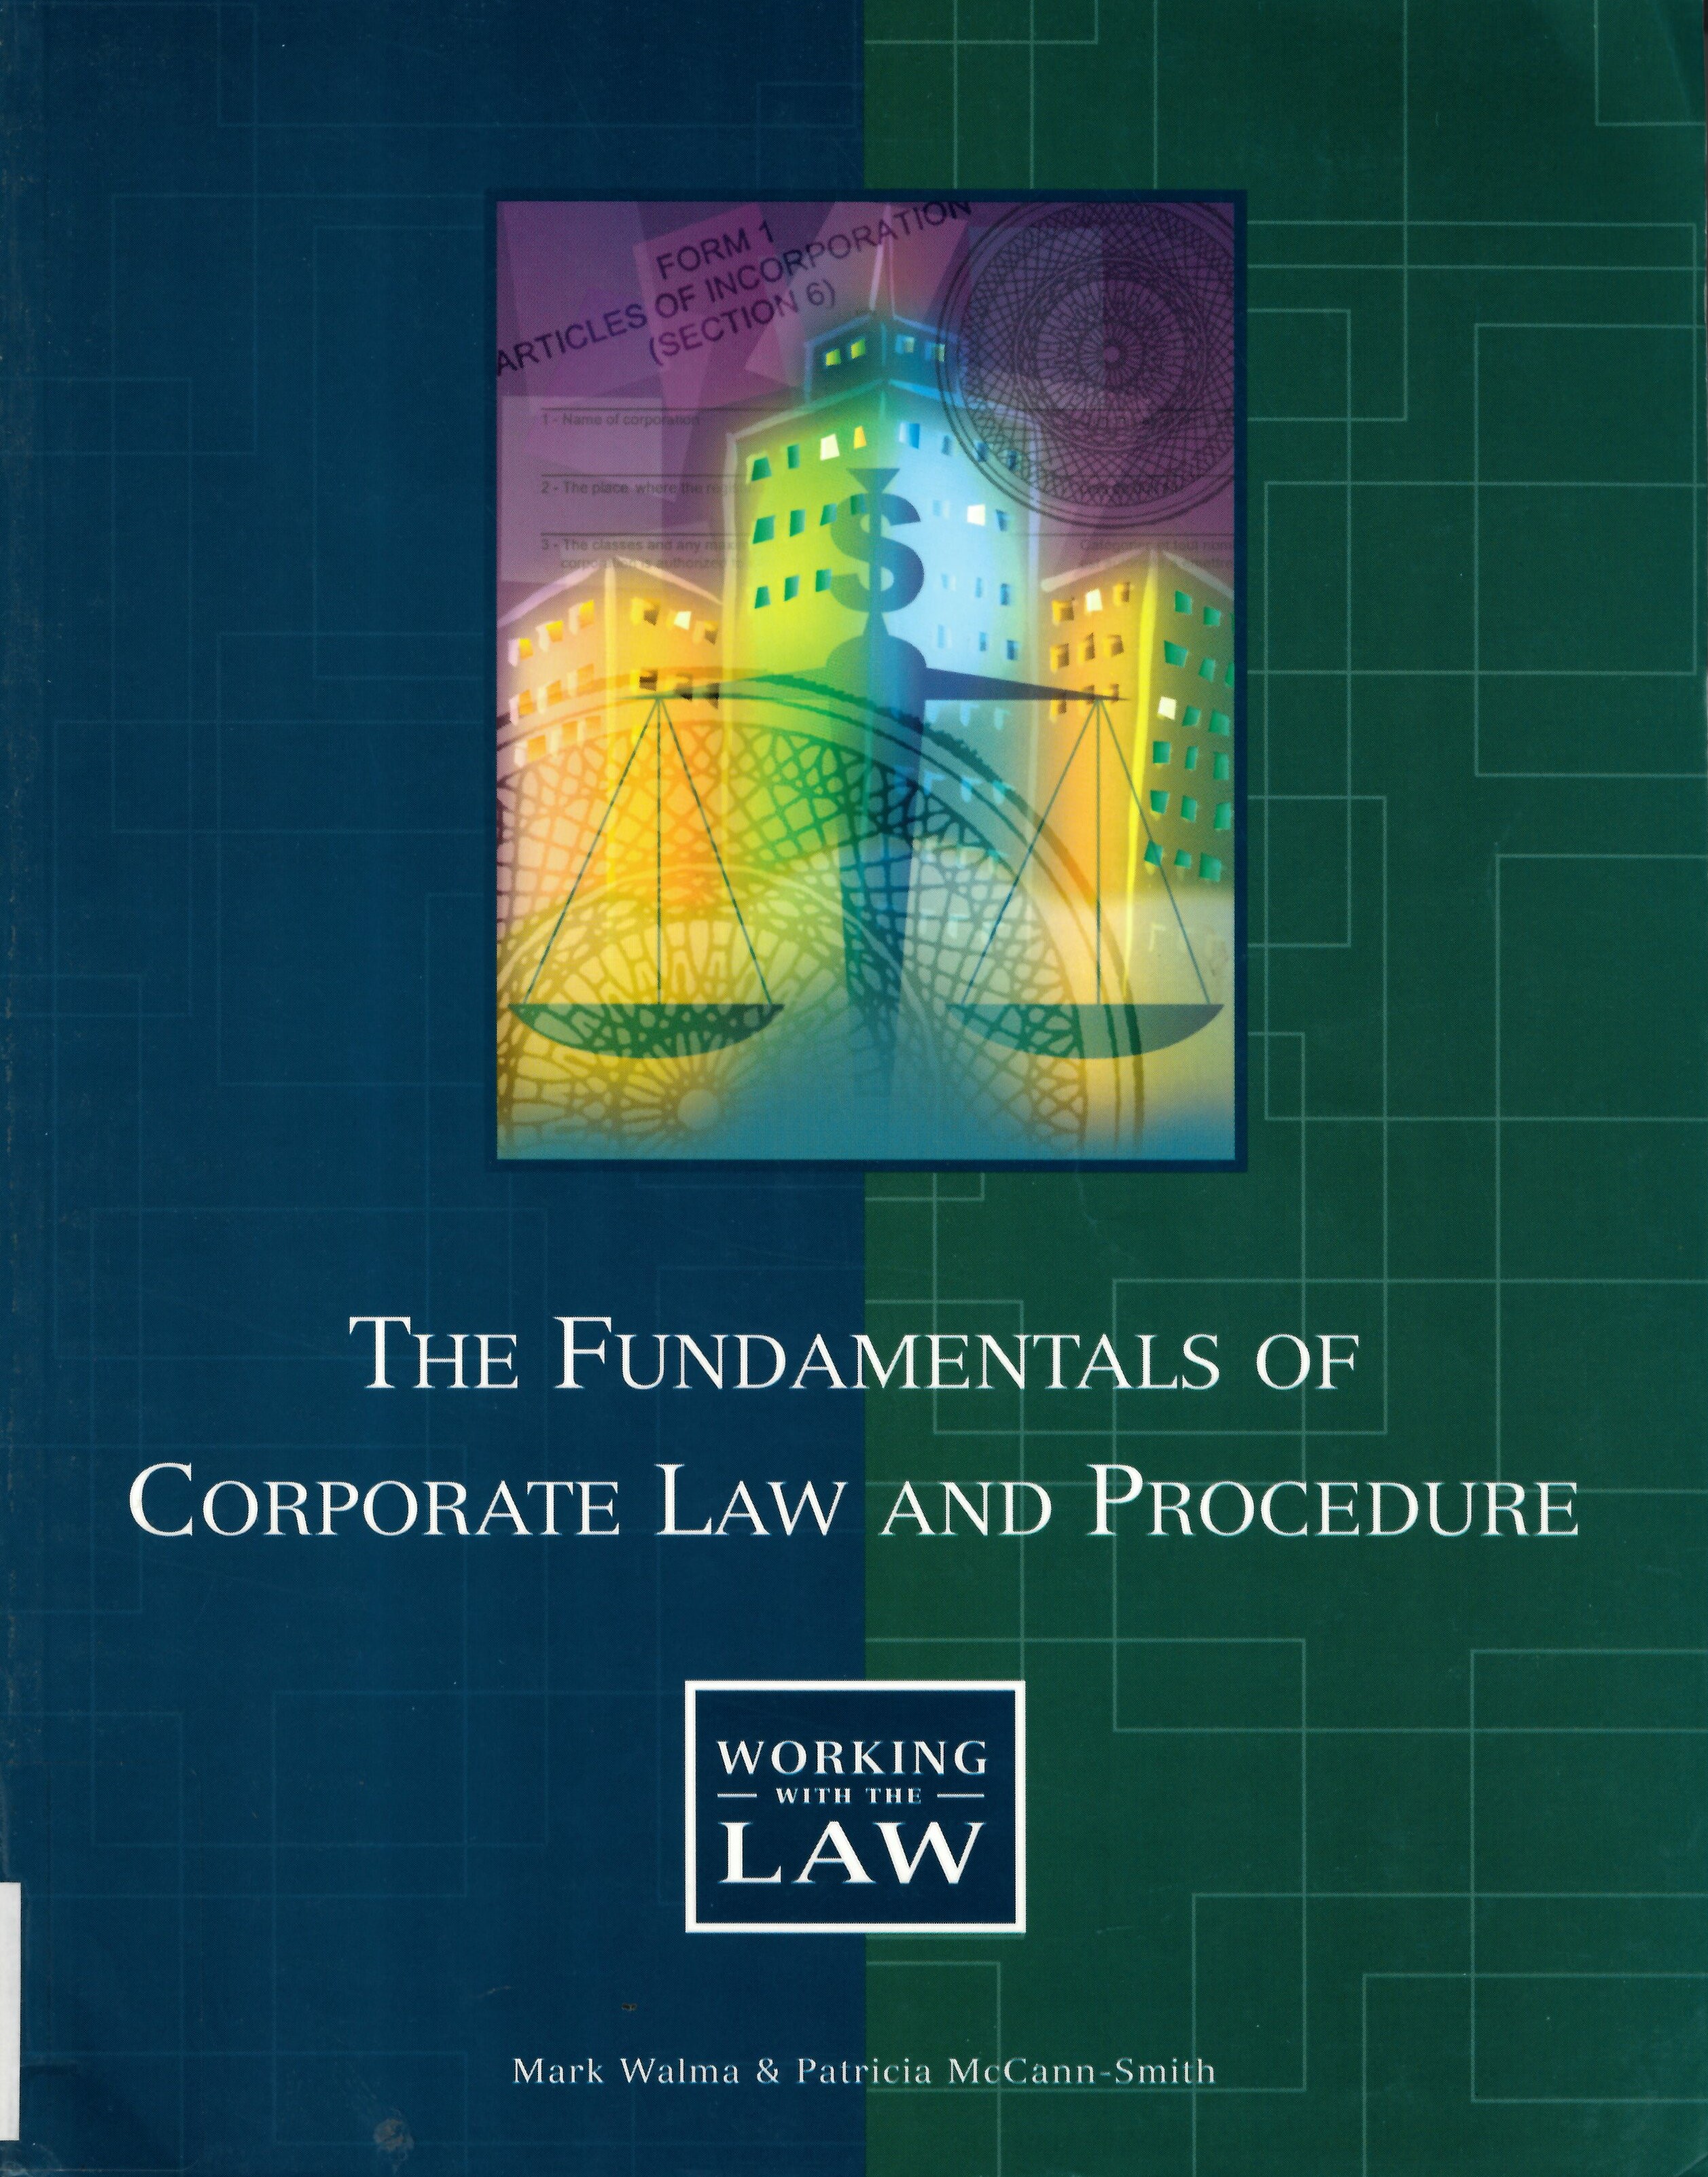 The fundamentals of corporate law and procedure